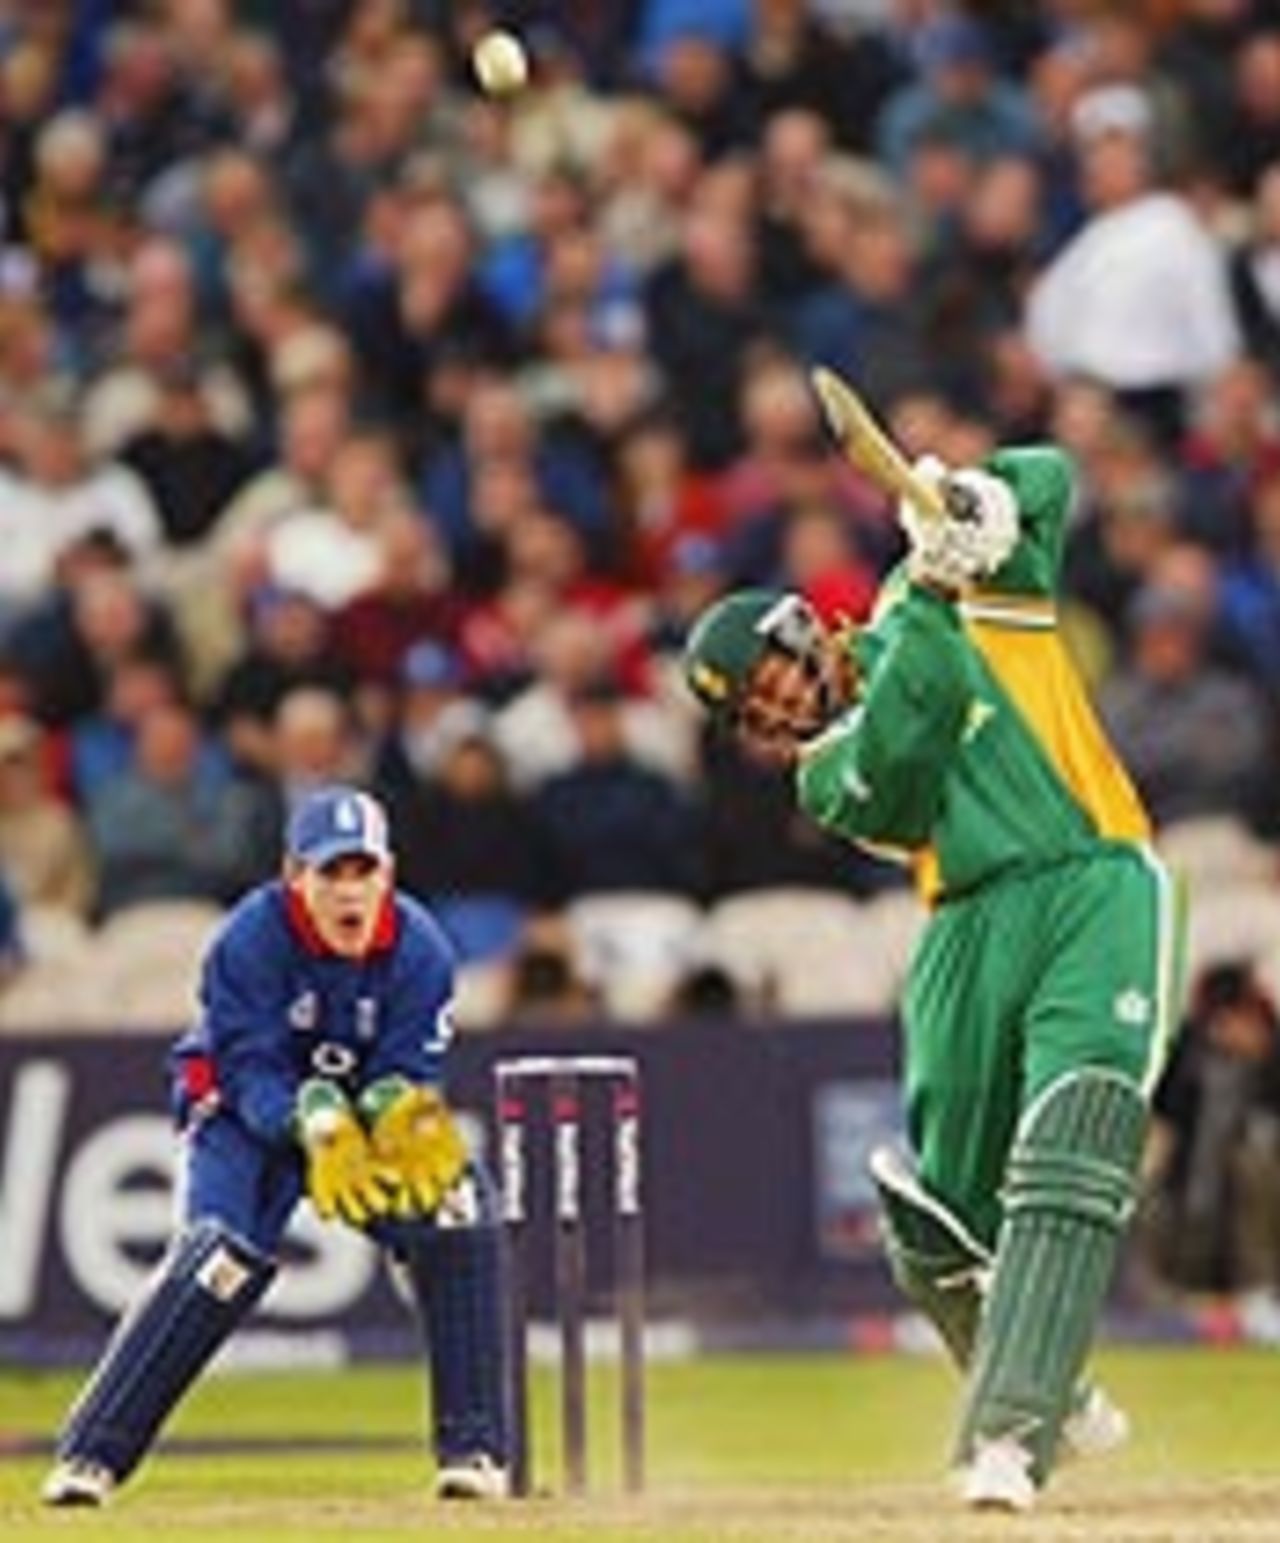 Jacques Kallis hits over the top